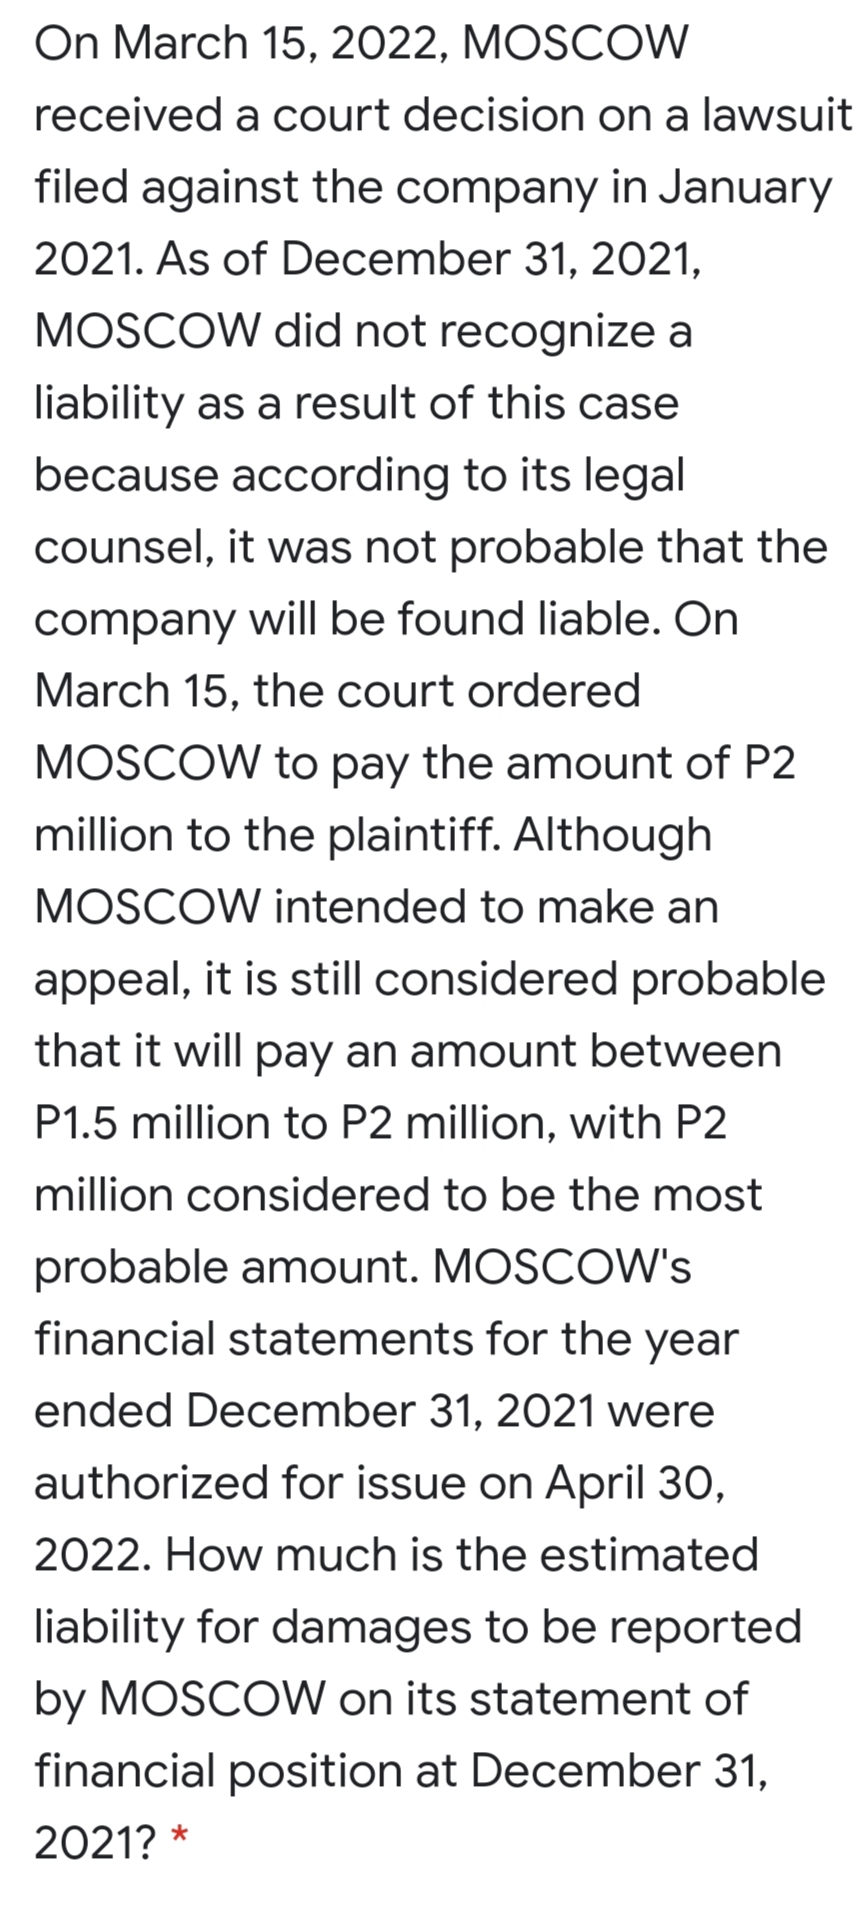 On March 15, 2022, MOSCOW
received a court decision on a lawsuit
filed against the company in January
2021. As of December 31, 2021,
MOSCOW did not recognize a
liability as a result of this case
because according to its legal
counsel, it was not probable that the
company will be found liable. On
March 15, the court ordered
MOSCOW to pay the amount of P2
million to the plaintiff. Although
MOSCOW intended to make an
appeal, it is still considered probable
that it will pay an amount between
P1.5 million to P2 million, with P2
million considered to be the most
probable amount. MOSCOW's
financial statements for the year
ended December 31, 2021 were
authorized for issue on April 30,
2022. How much is the estimated
liability for damages to be reported
by MOSCOW on its statement of
financial position at December 31,
2021? *
